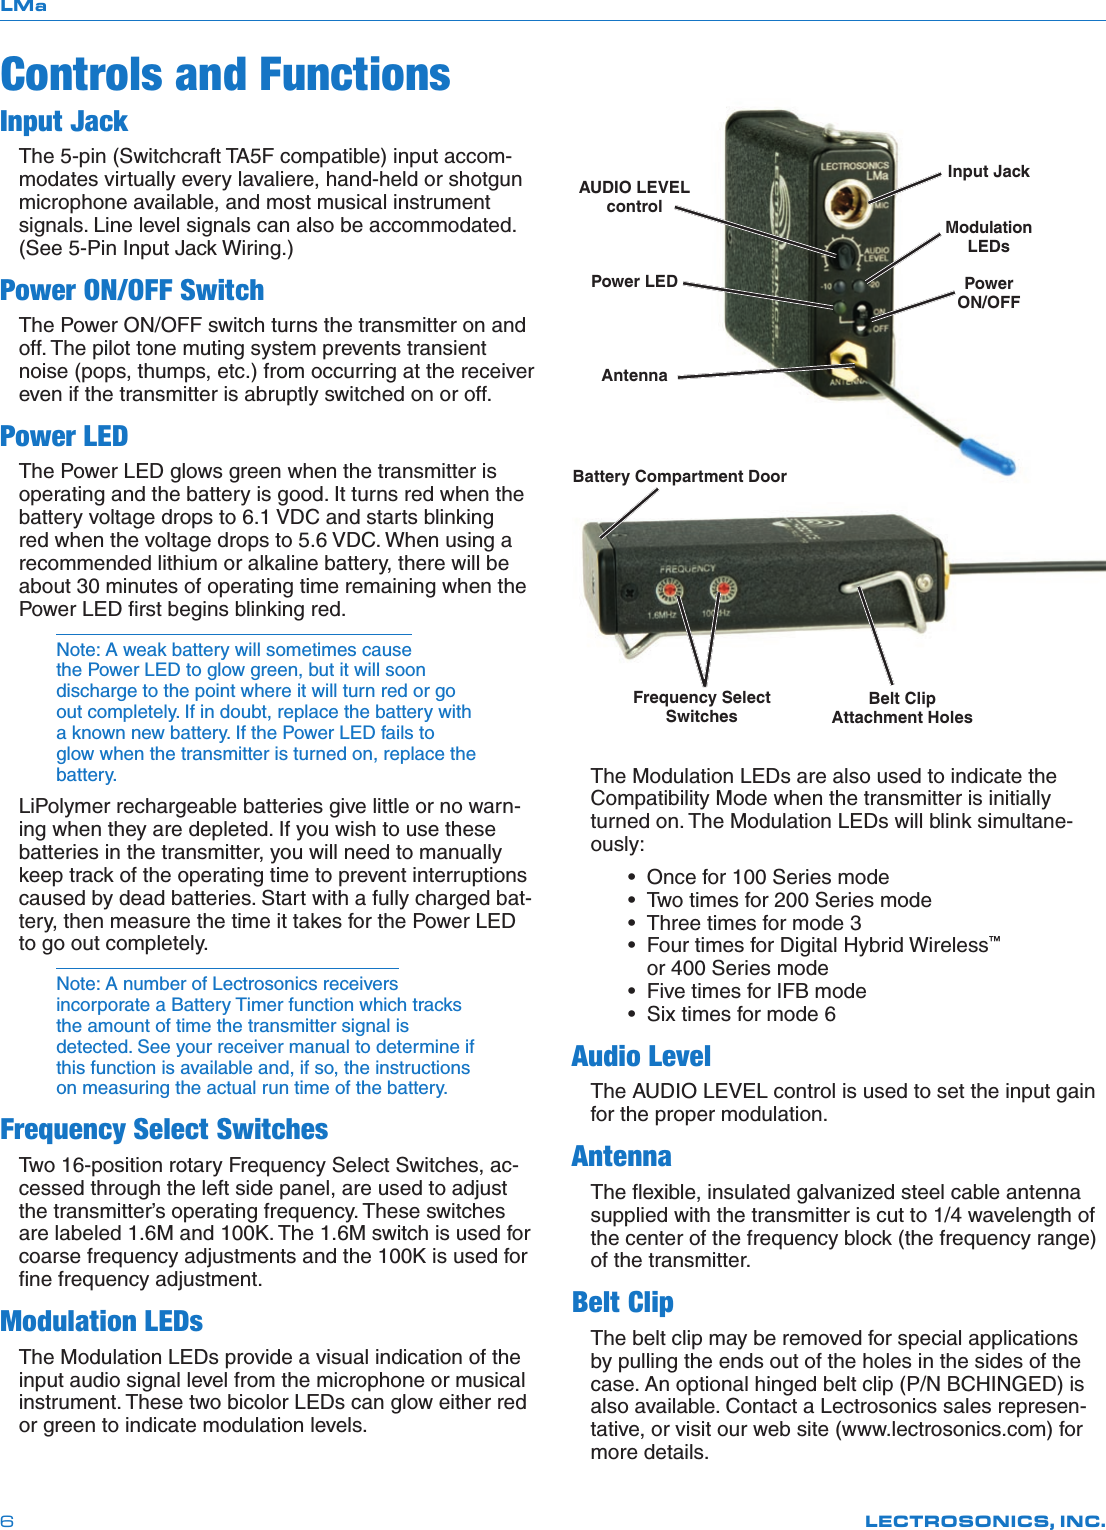 LMaLECTROSONICS, INC.6Controls and FunctionsInput JackThe 5-pin (Switchcraft TA5F compatible) input accom-modates virtually every lavaliere, hand-held or shotgun microphone available, and most musical instrument signals. Line level signals can also be accommodated. (See 5-Pin Input Jack Wiring.)Power ON/OFF SwitchThe Power ON/OFF switch turns the transmitter on and off. The pilot tone muting system prevents transient noise (pops, thumps, etc.) from occurring at the receiver even if the transmitter is abruptly switched on or off.Power LEDThe Power LED glows green when the transmitter is operating and the battery is good. It turns red when the battery voltage drops to 6.1 VDC and starts blinking red when the voltage drops to 5.6 VDC. When using a recommended lithium or alkaline battery, there will be about 30 minutes of operating time remaining when the Power LED ﬁrst begins blinking red.Note: A weak battery will sometimes cause the Power LED to glow green, but it will soon discharge to the point where it will turn red or go out completely. If in doubt, replace the battery with a known new battery. If the Power LED fails to glow when the transmitter is turned on, replace the battery.LiPolymer rechargeable batteries give little or no warn-ing when they are depleted. If you wish to use these batteries in the transmitter, you will need to manually keep track of the operating time to prevent interruptions caused by dead batteries. Start with a fully charged bat-tery, then measure the time it takes for the Power LED to go out completely. Note: A number of Lectrosonics receivers incorporate a Battery Timer function which tracks the amount of time the transmitter signal is detected. See your receiver manual to determine if this function is available and, if so, the instructions on measuring the actual run time of the battery.Frequency Select SwitchesTwo 16-position rotary Frequency Select Switches, ac-cessed through the left side panel, are used to adjust the transmitter’s operating frequency. These switches are labeled 1.6M and 100K. The 1.6M switch is used for coarse frequency adjustments and the 100K is used for ﬁne frequency adjustment.Modulation LEDsThe Modulation LEDs provide a visual indication of the input audio signal level from the microphone or musical instrument. These two bicolor LEDs can glow either red or green to indicate modulation levels. The Modulation LEDs are also used to indicate the Compatibility Mode when the transmitter is initially turned on. The Modulation LEDs will blink simultane-ously: • Oncefor100Seriesmode •Twotimesfor200Seriesmode •Threetimesformode3 •FourtimesforDigitalHybridWireless™    or 400 Series mode •FivetimesforIFBmode •Sixtimesformode6Audio LevelThe AUDIO LEVEL control is used to set the input gain for the proper modulation.AntennaThe ﬂexible, insulated galvanized steel cable antenna supplied with the transmitter is cut to 1/4 wavelength of the center of the frequency block (the frequency range) of the transmitter. Belt ClipThe belt clip may be removed for special applications by pulling the ends out of the holes in the sides of the case. An optional hinged belt clip (P/N BCHINGED) is also available. Contact a Lectrosonics sales represen-tative, or visit our web site (www.lectrosonics.com) for more details.AUDIO LEVEL controlPower LEDAntennaInput JackModulation LEDsPowerON/OFFBelt Clip Attachment HolesFrequency Select SwitchesBattery Compartment Door